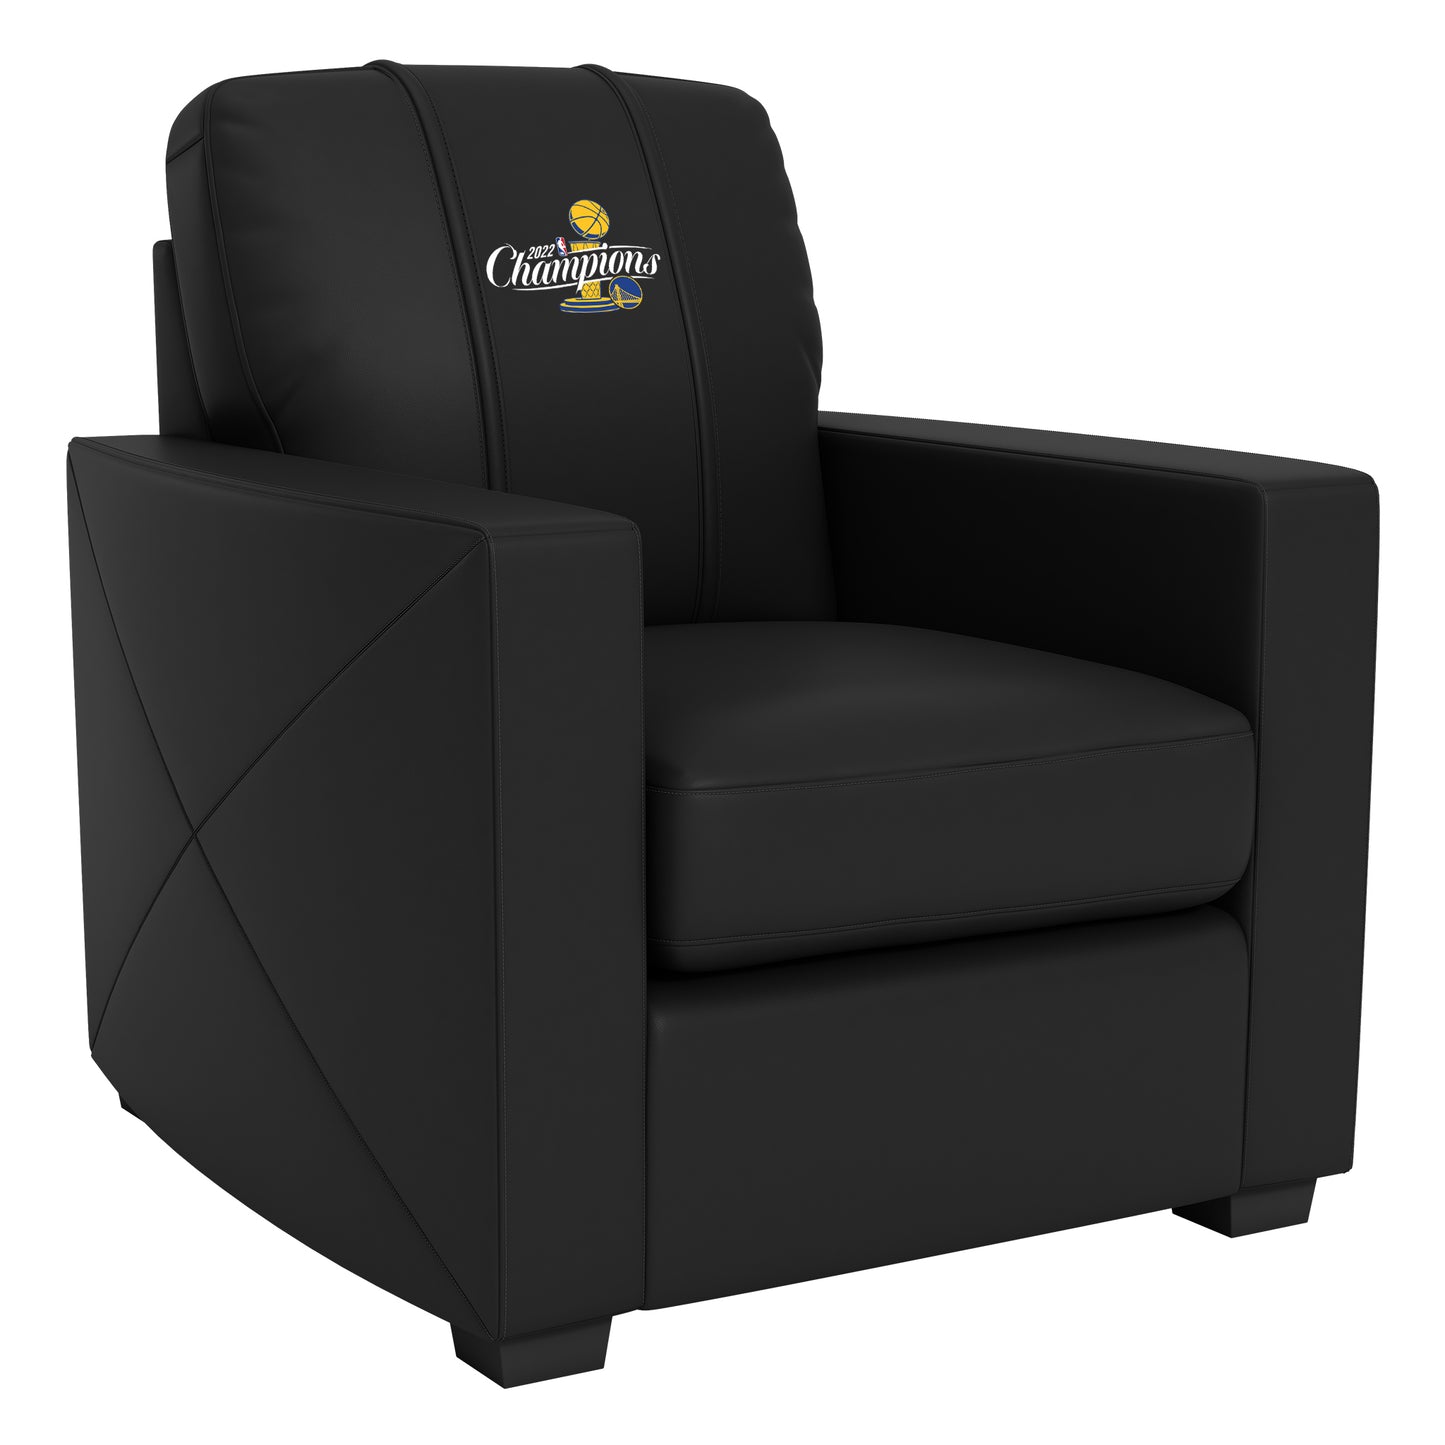 Silver Club Chair with Golden State Warriors 2022 Champions Logo